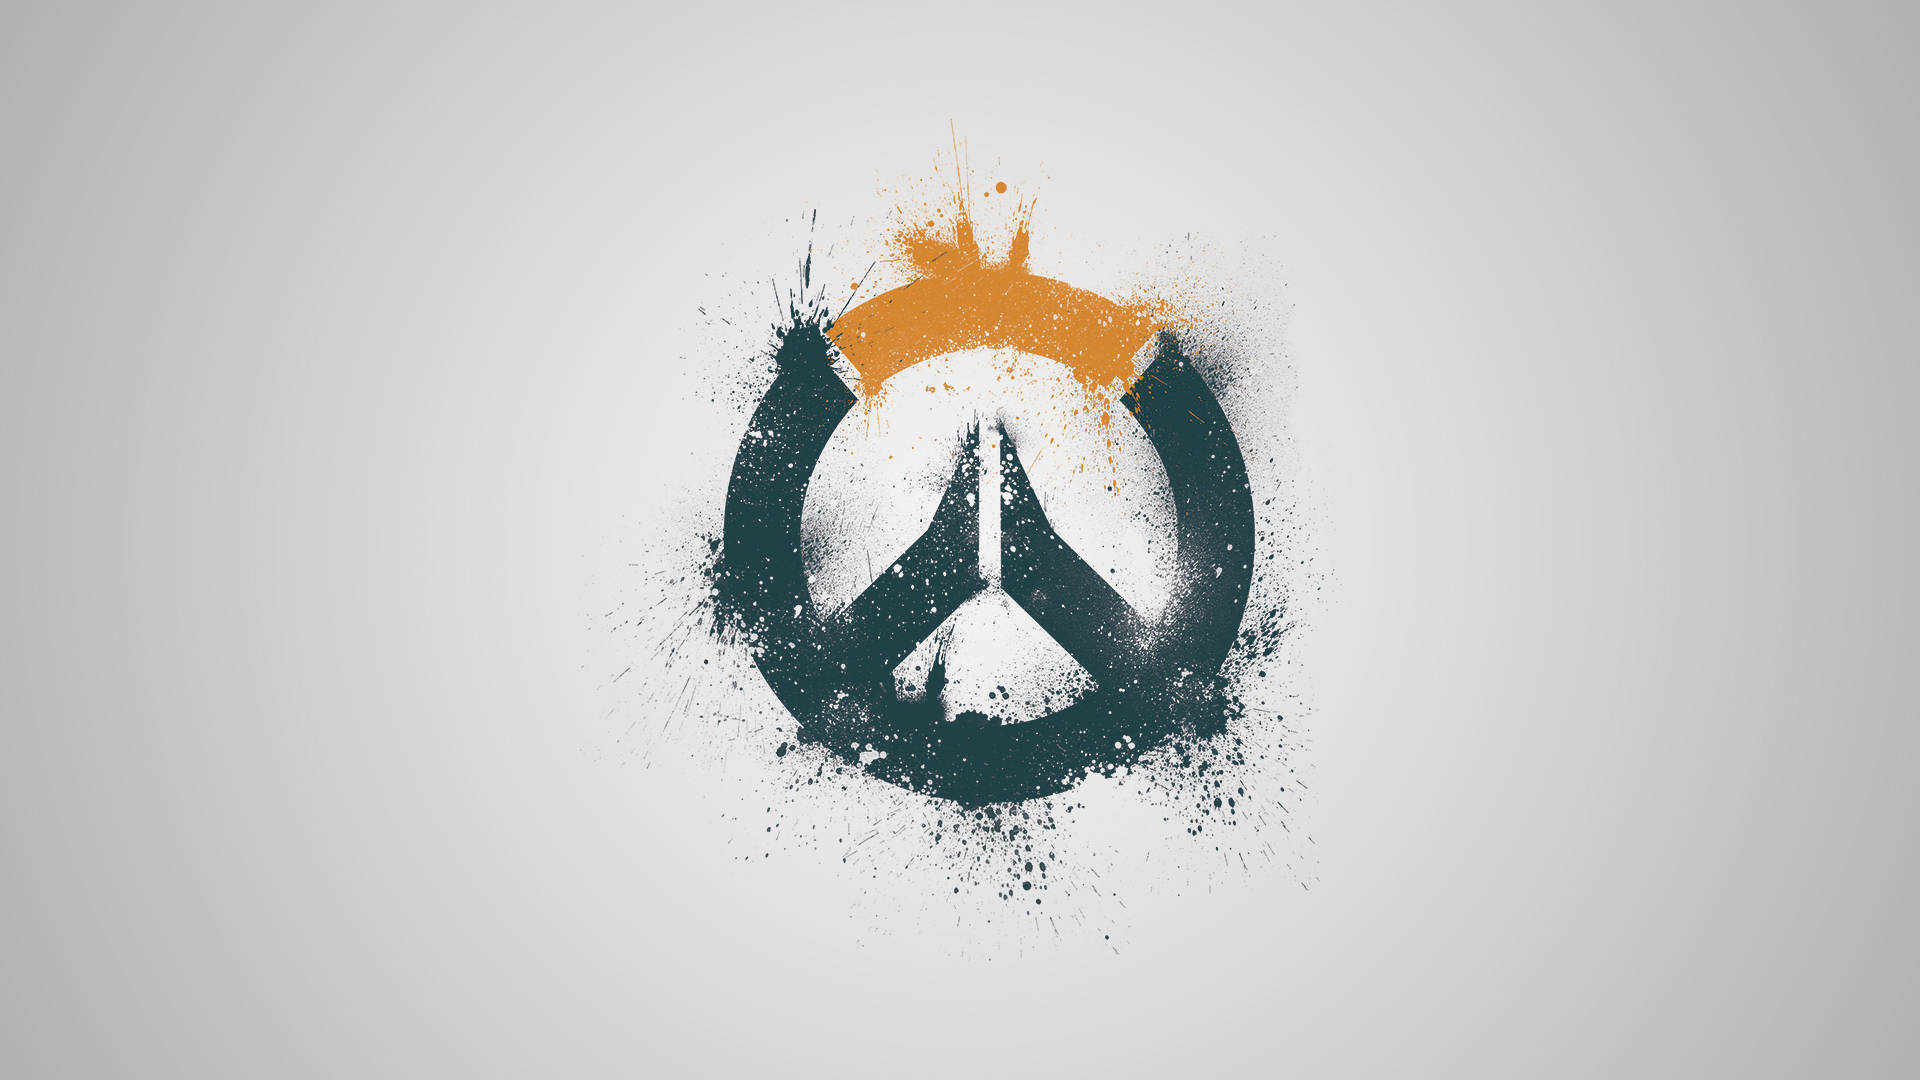 1920X1080 Overwatch Wallpaper and Background